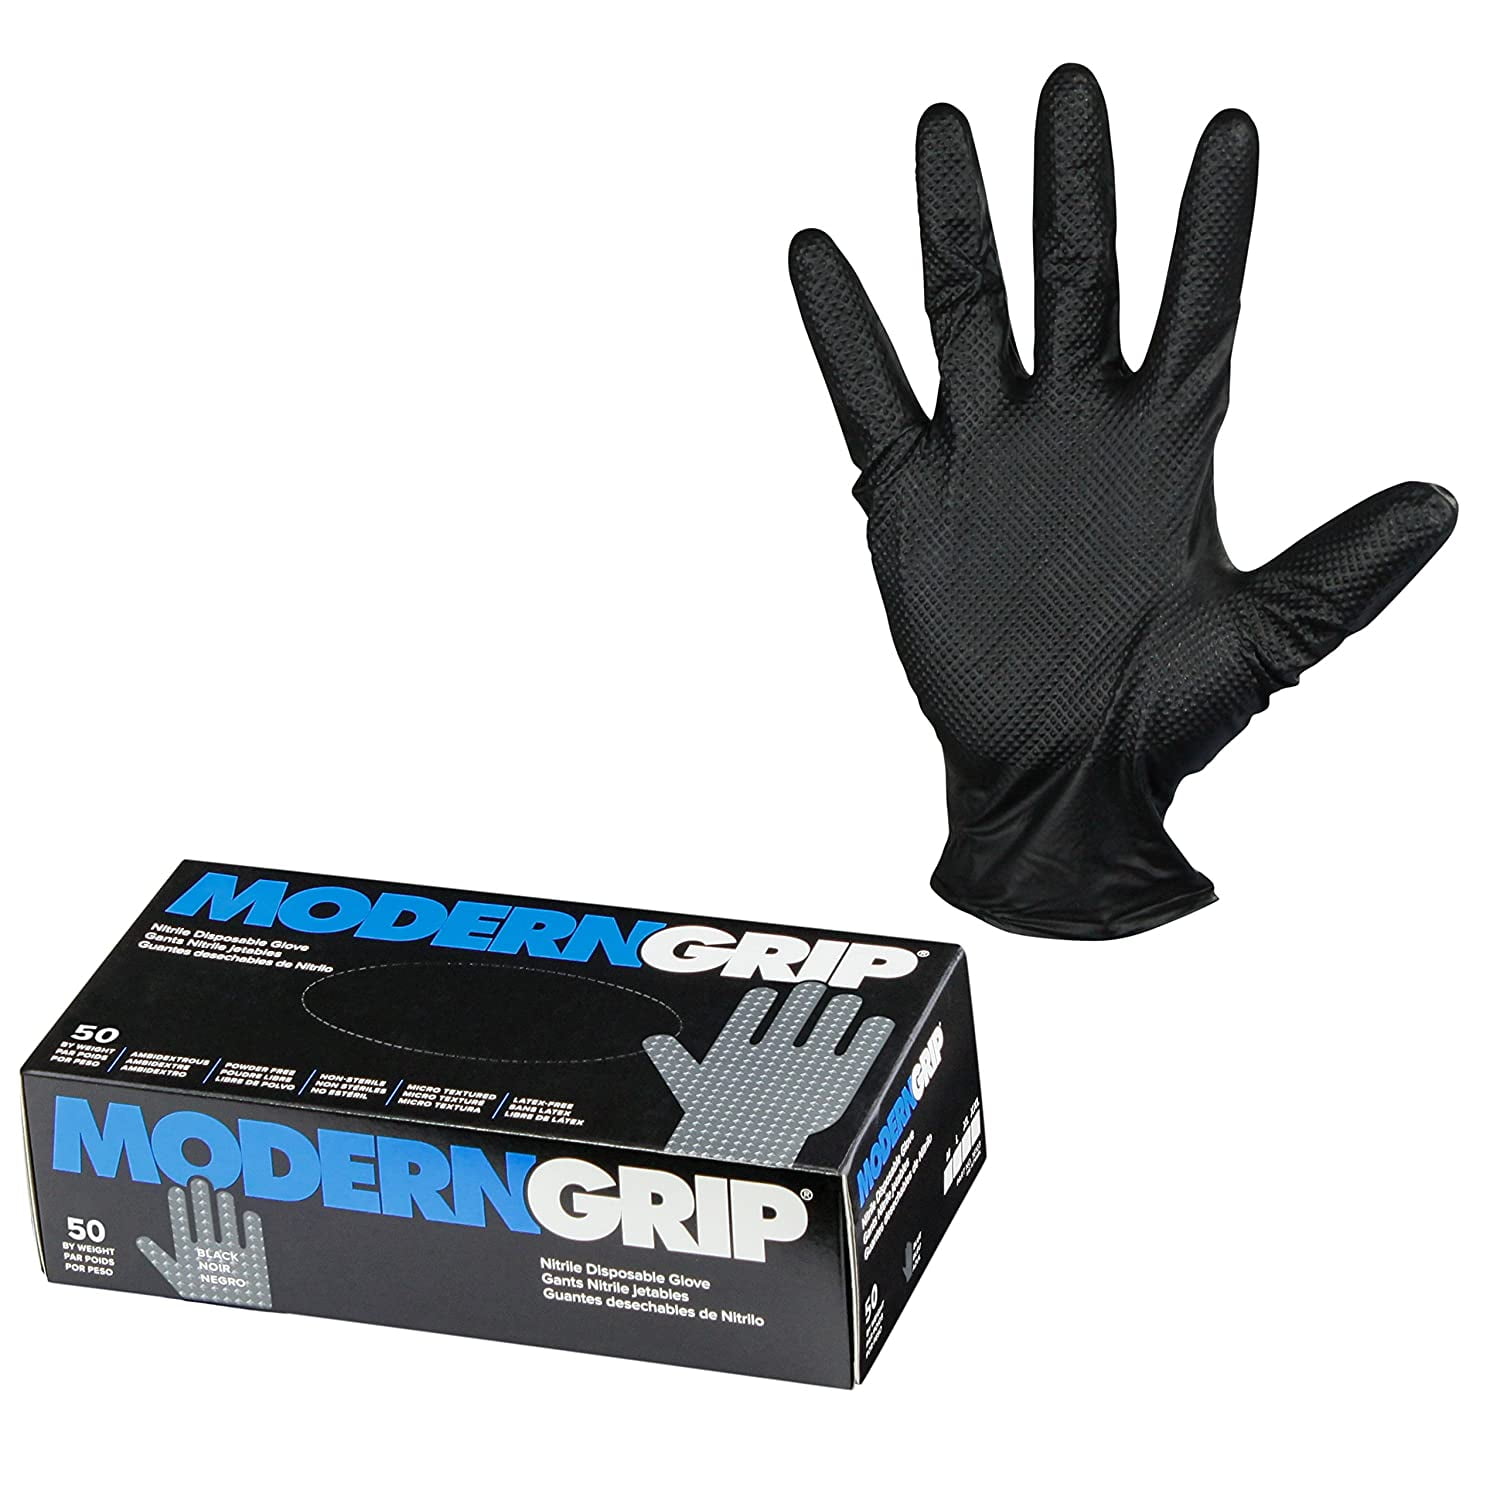 Industrial and Household 50 count Latex Free Diamond Textured for Superior Grip Powder Free Medium Modern Grip 18195-M Nitrile 8 mil Thickness Premium Disposable Heavy Duty Gloves Black 